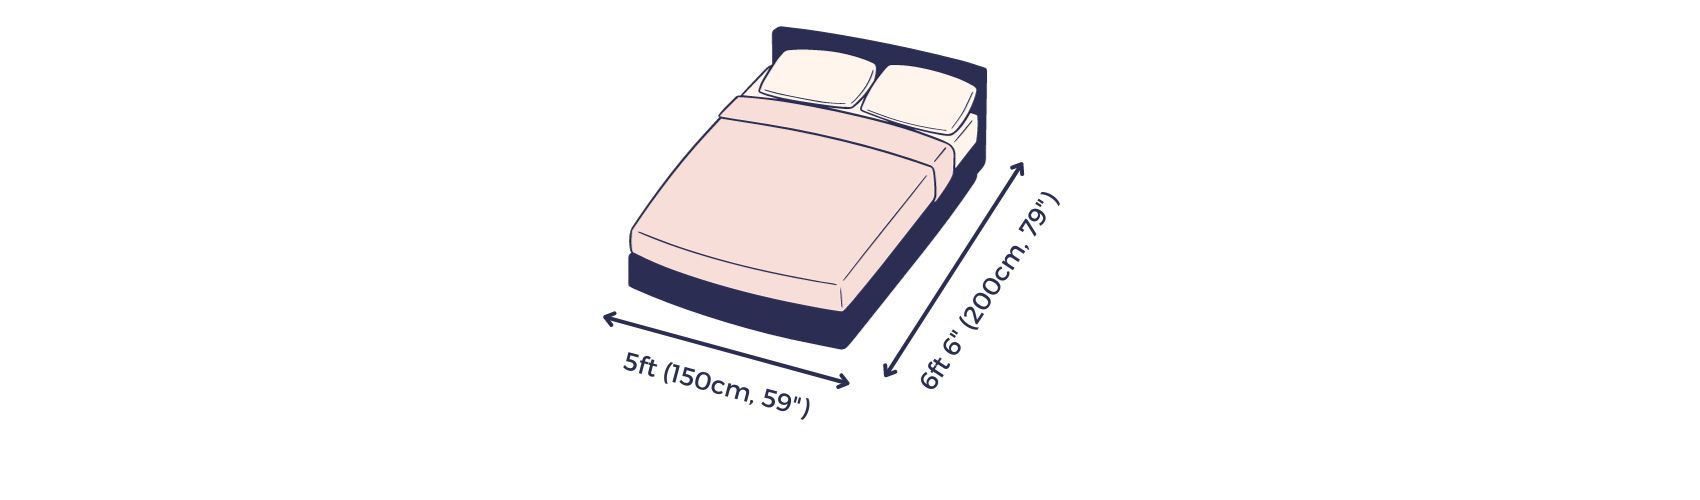 King size bed size